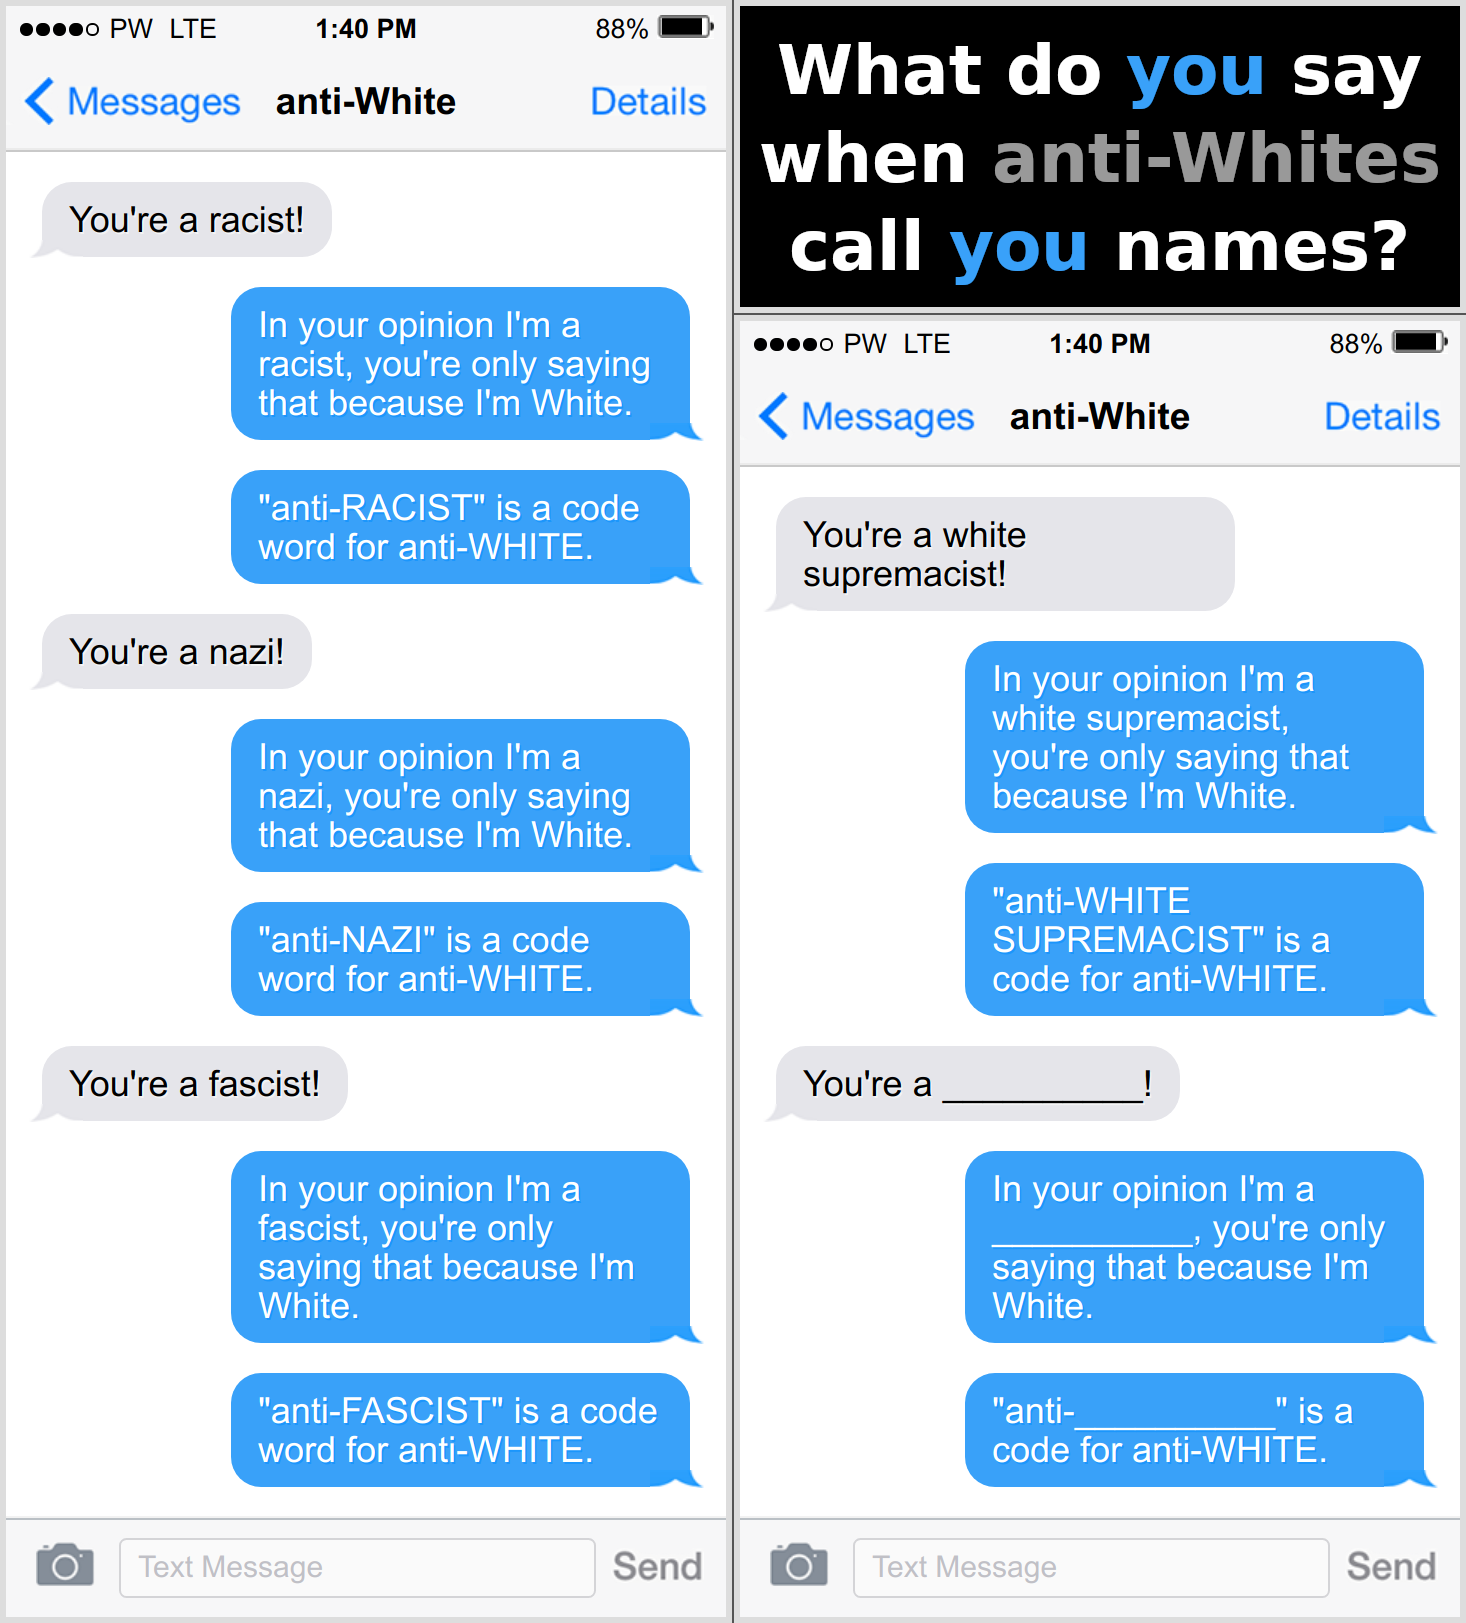 infographic - what do you say when anti-whites call you names